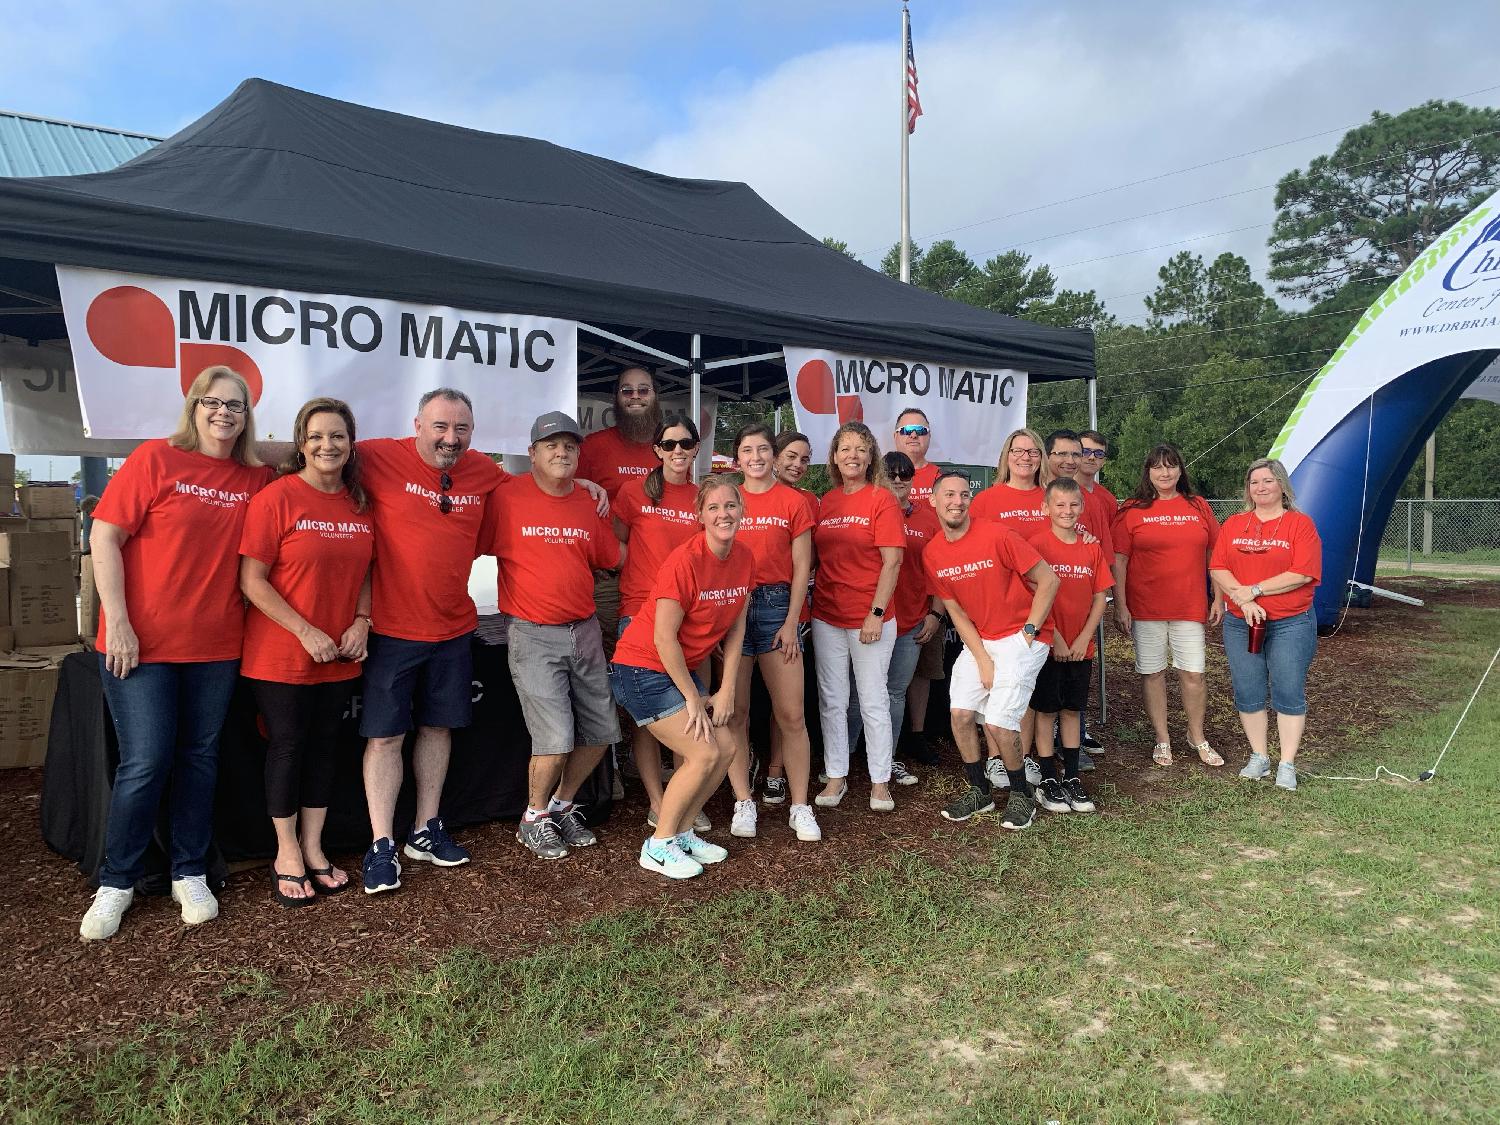 Micro Matic, USA employees volunteering at our local Back to School Extravaganza!  We helped provide school supplies to almost 2,000 children.